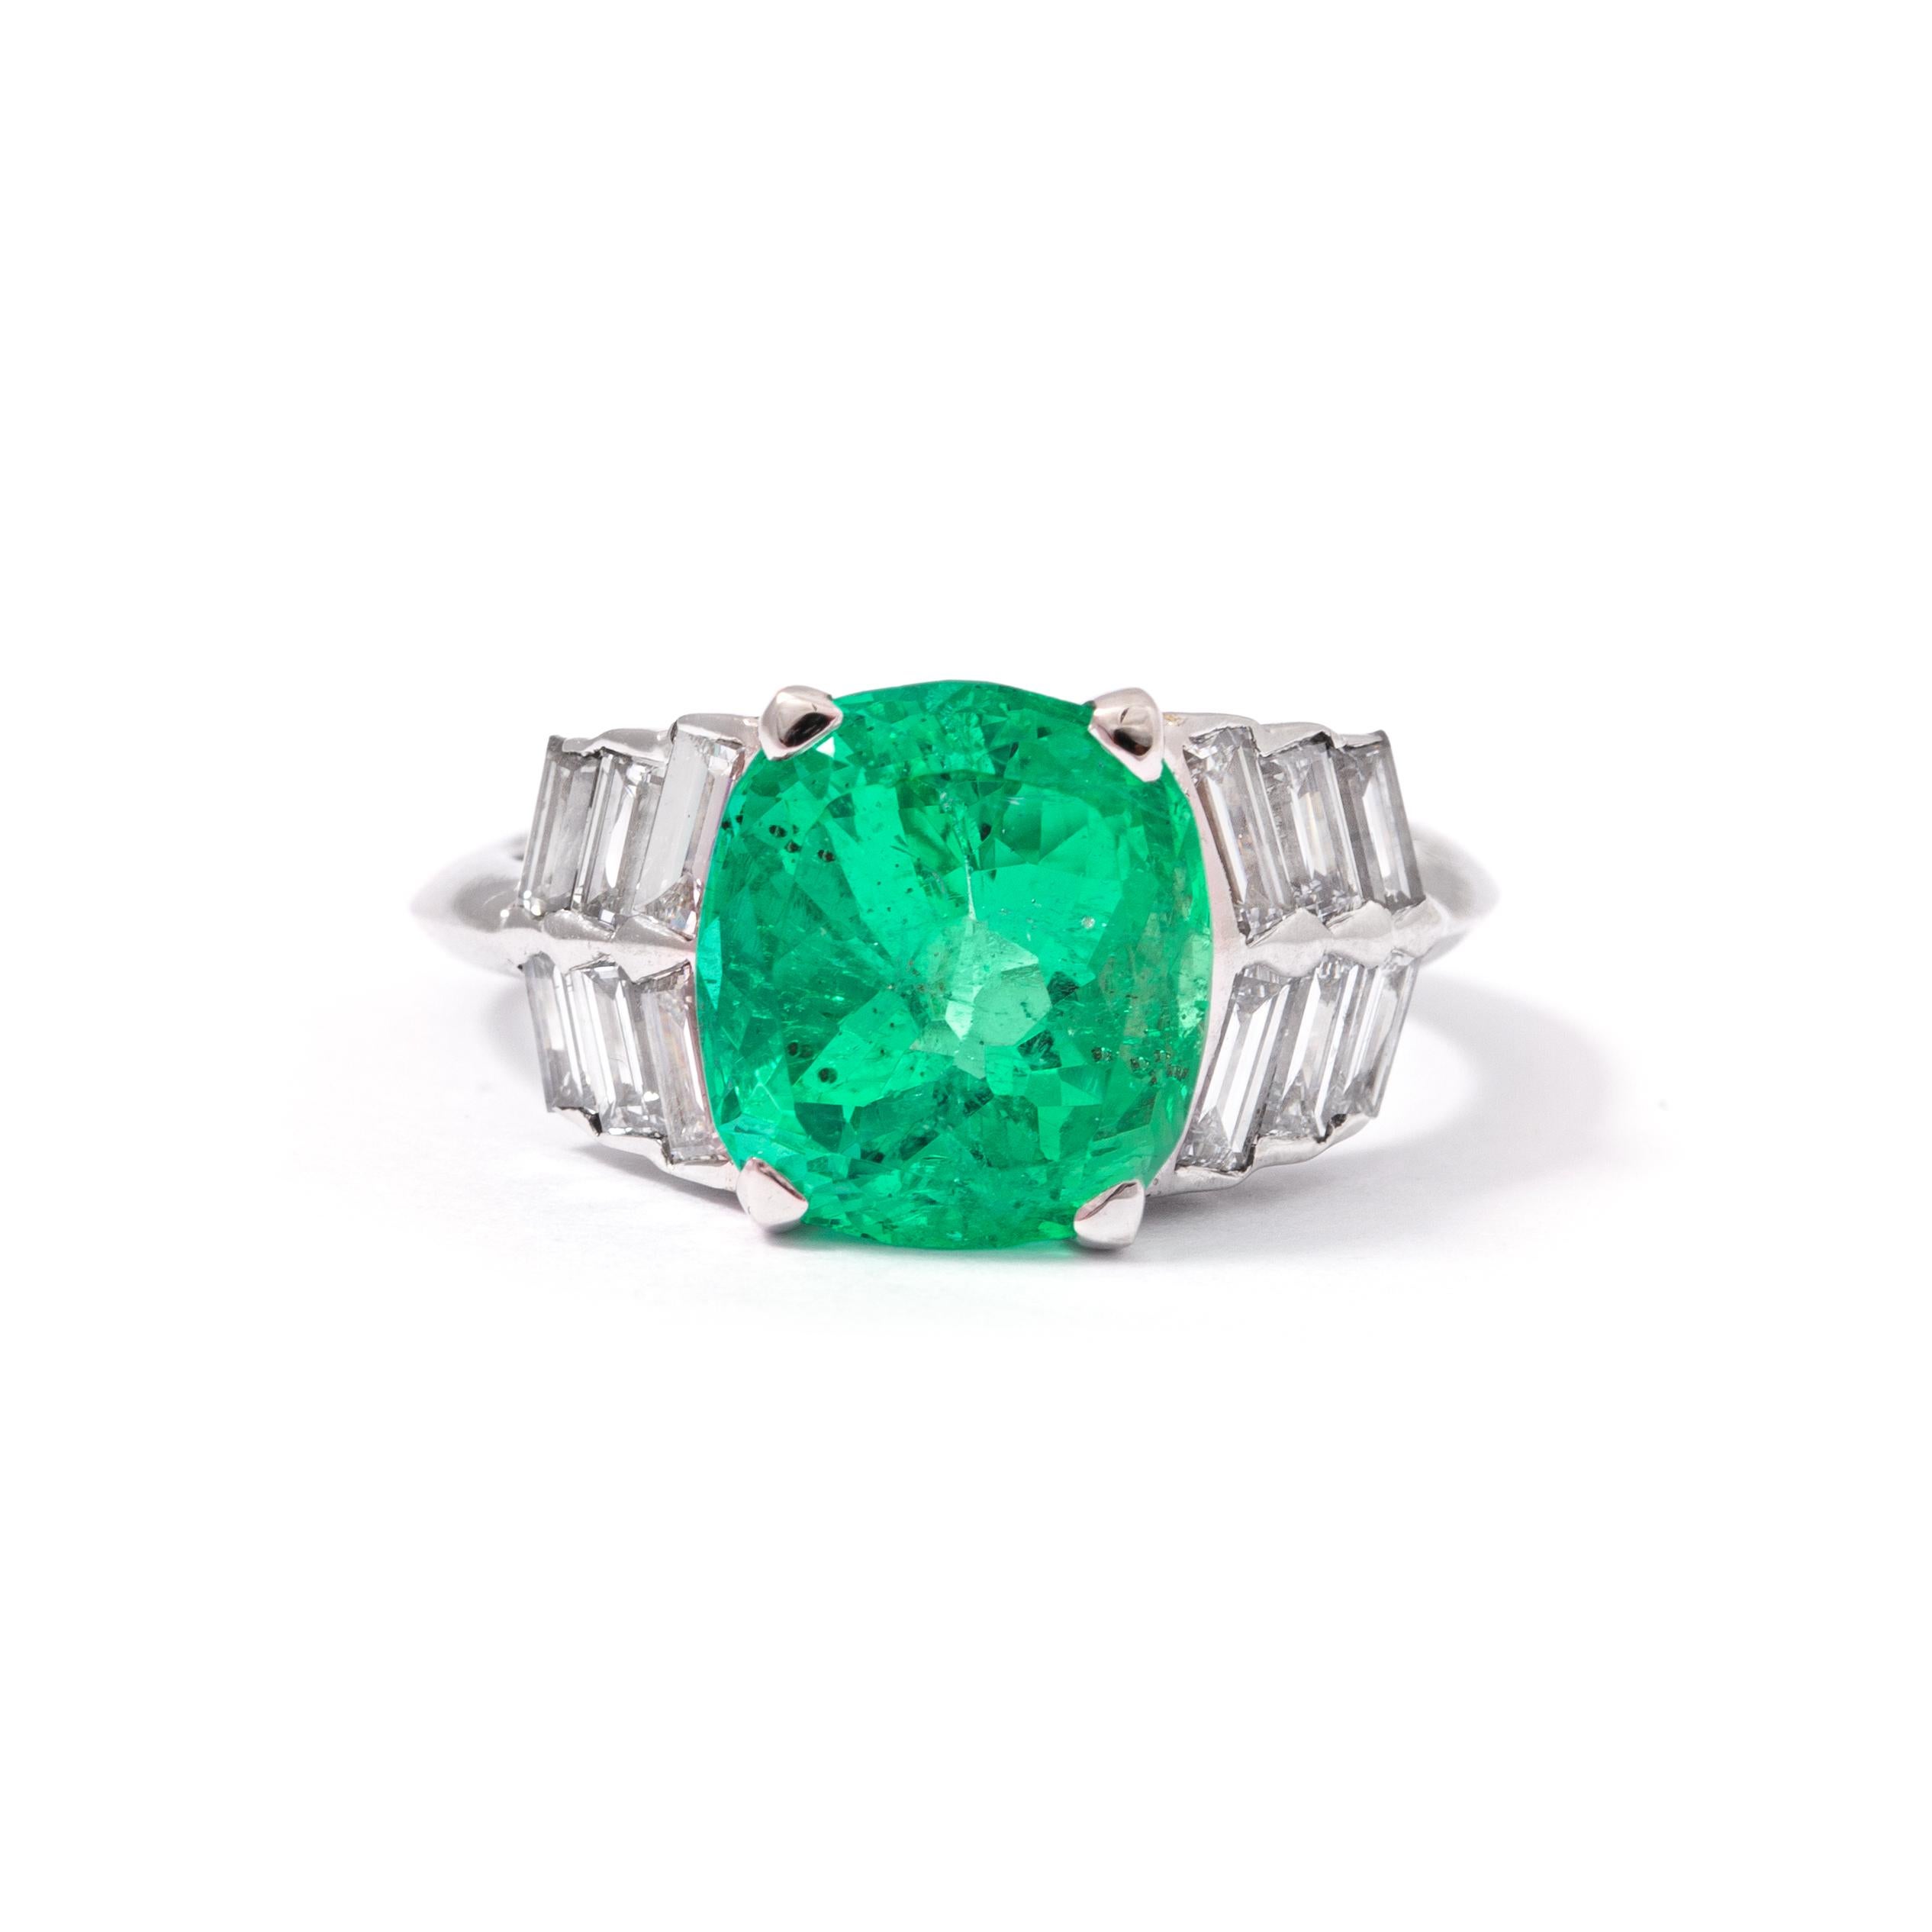 4.63 carat Emerald natural Colombian insignificant oil according to certificate Grs 2105-04704618K on 18K white gold ring, supported by baguette cut diamonds. 
Finger size: 54. 
Gross weight: 7.35 grams.